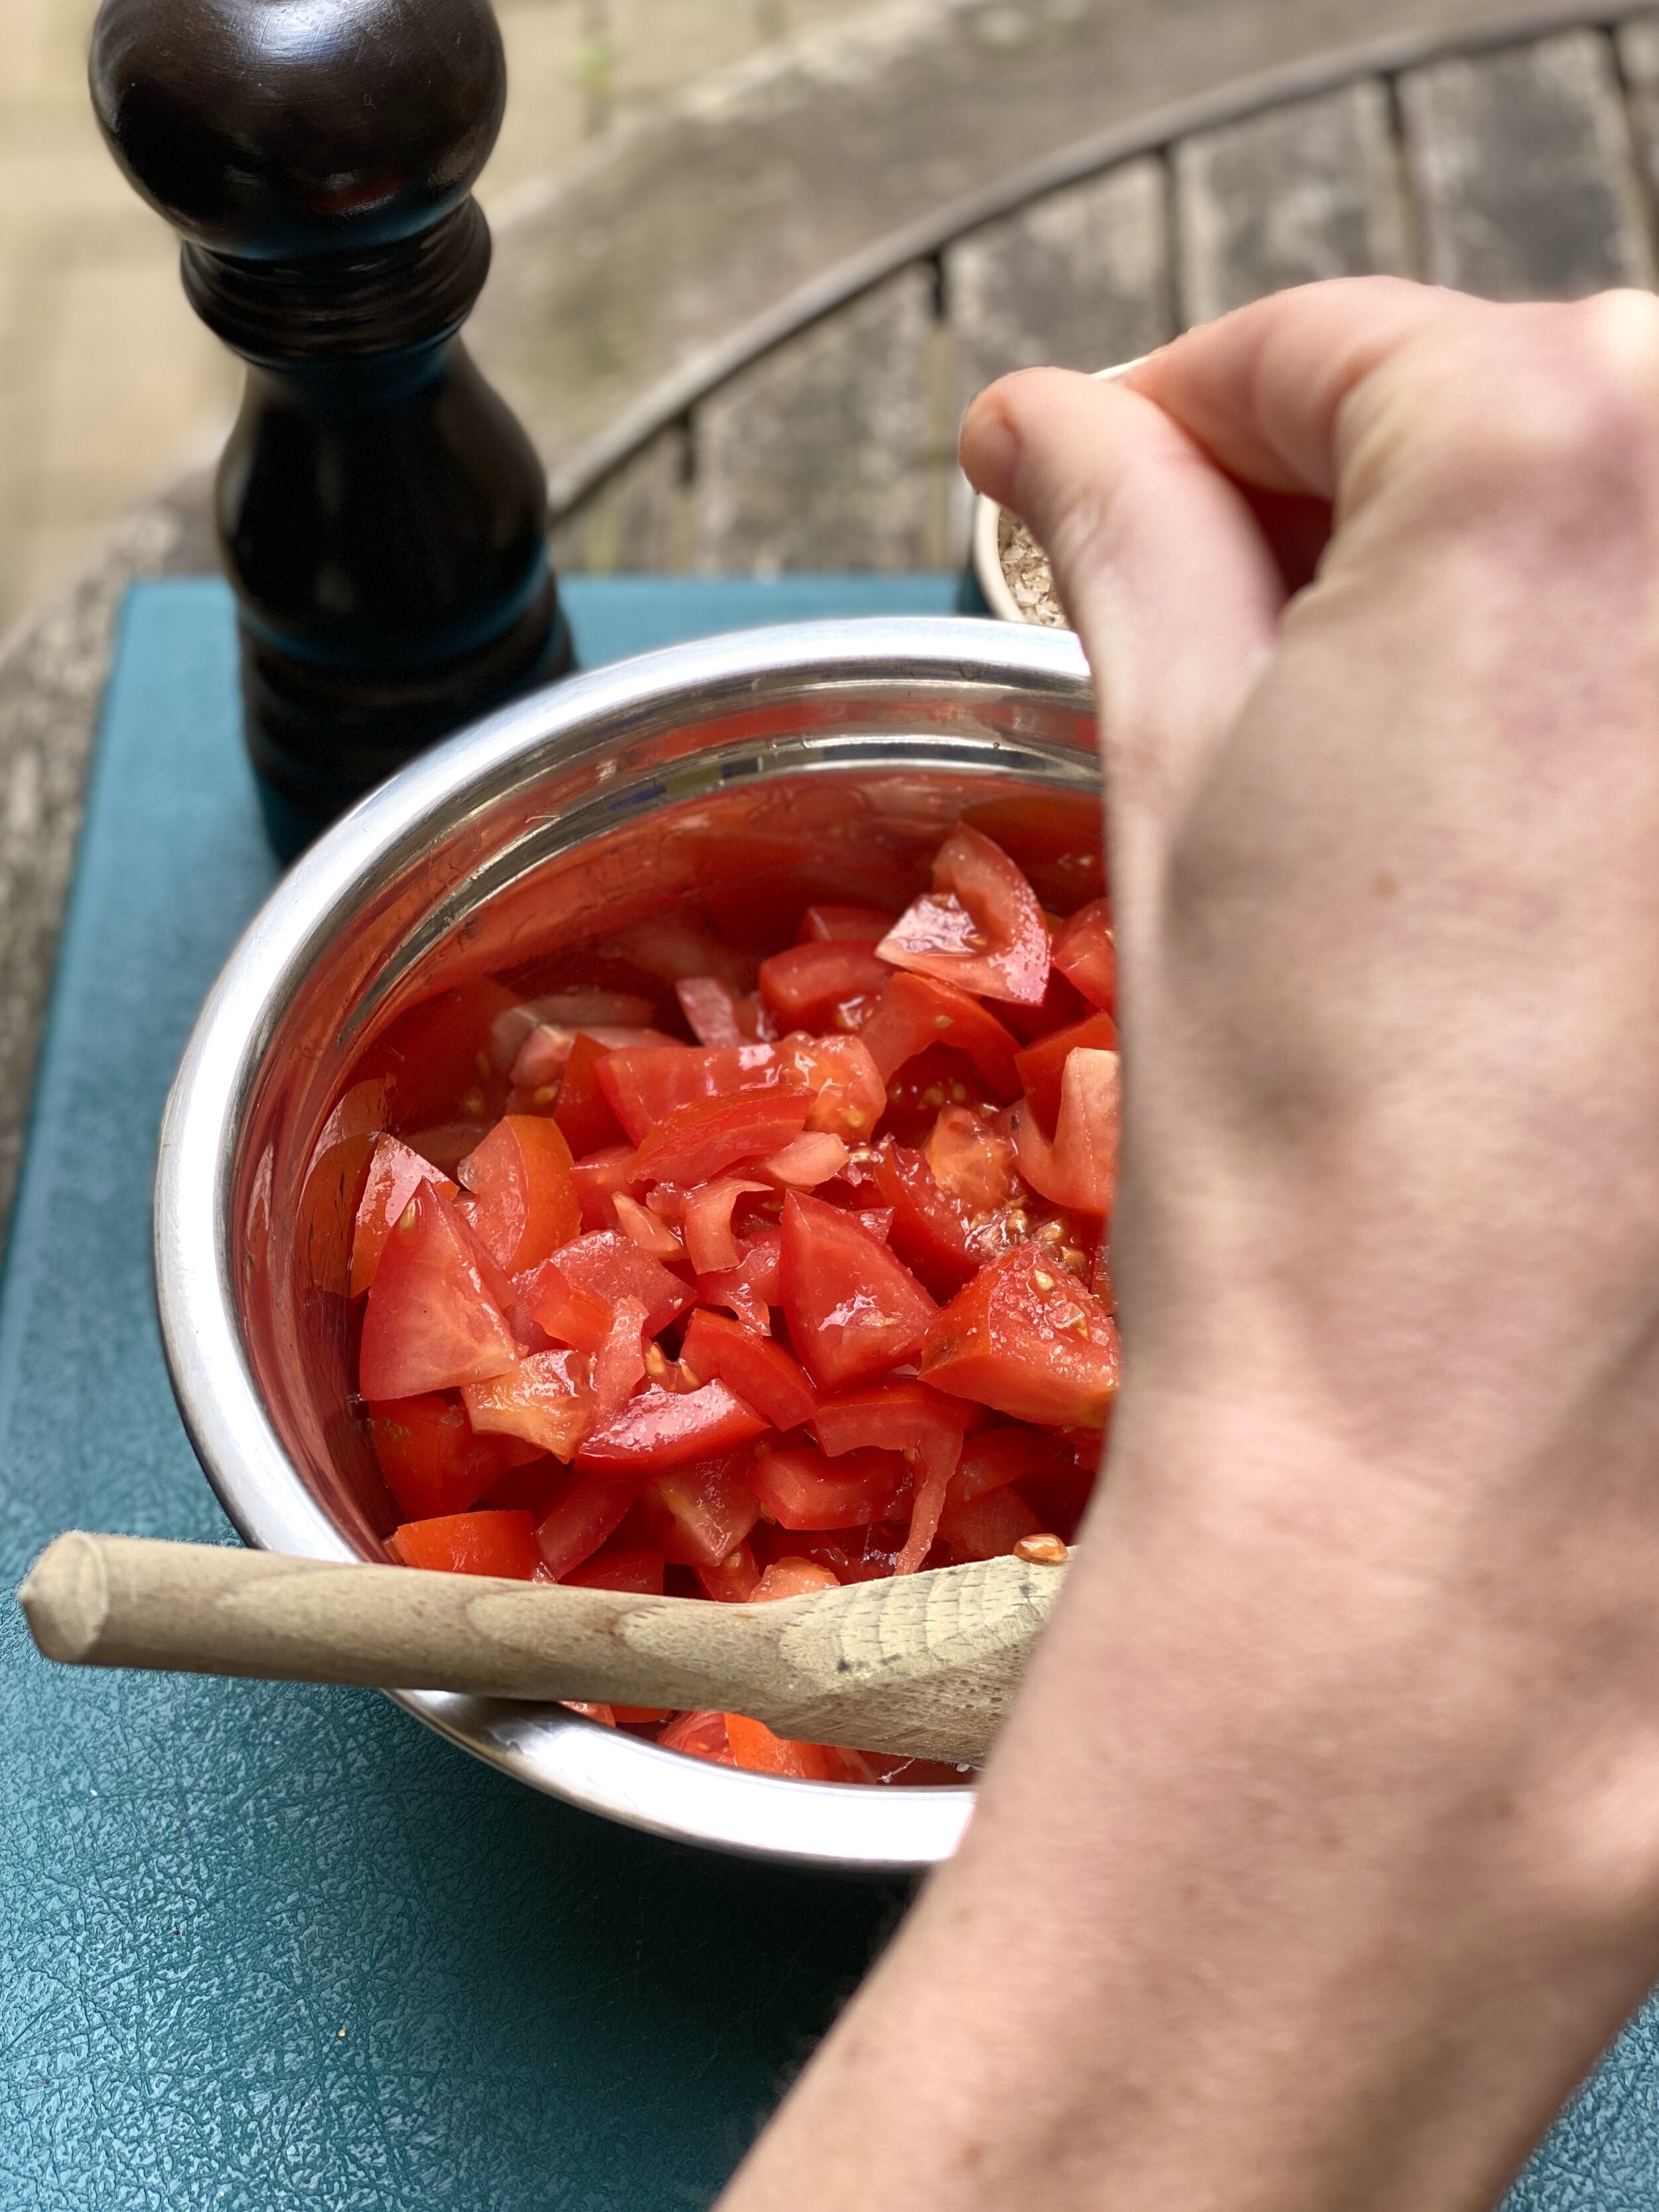 Seasoning tomatoes with salt and pepper